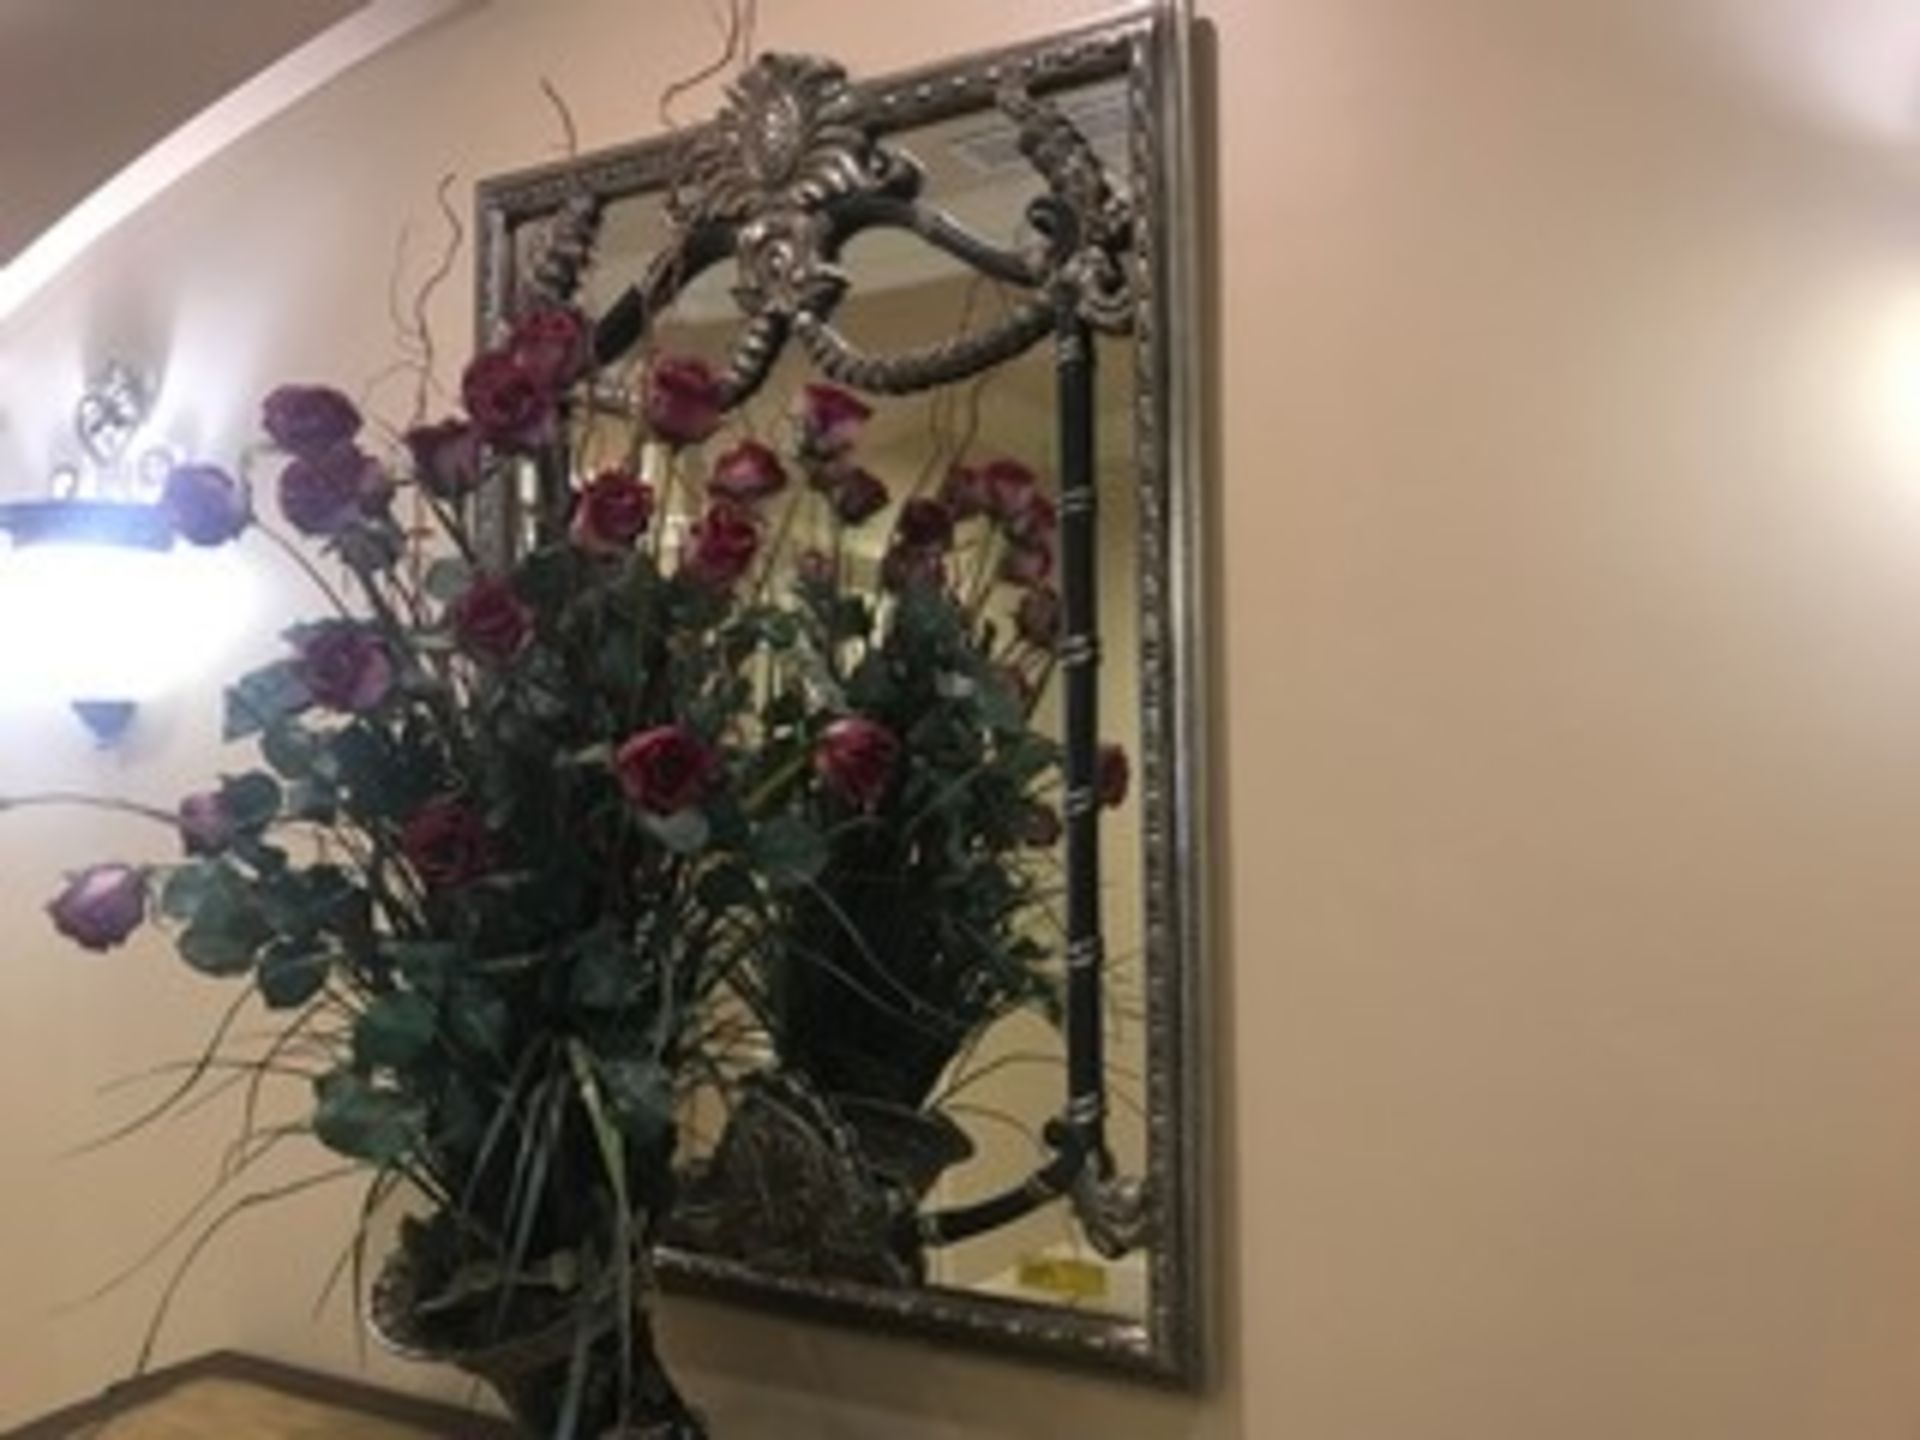 ORNATE MIRROR - 48'' HIGH x 35'' WIDE (INSIDE BY BANQUET HALL)